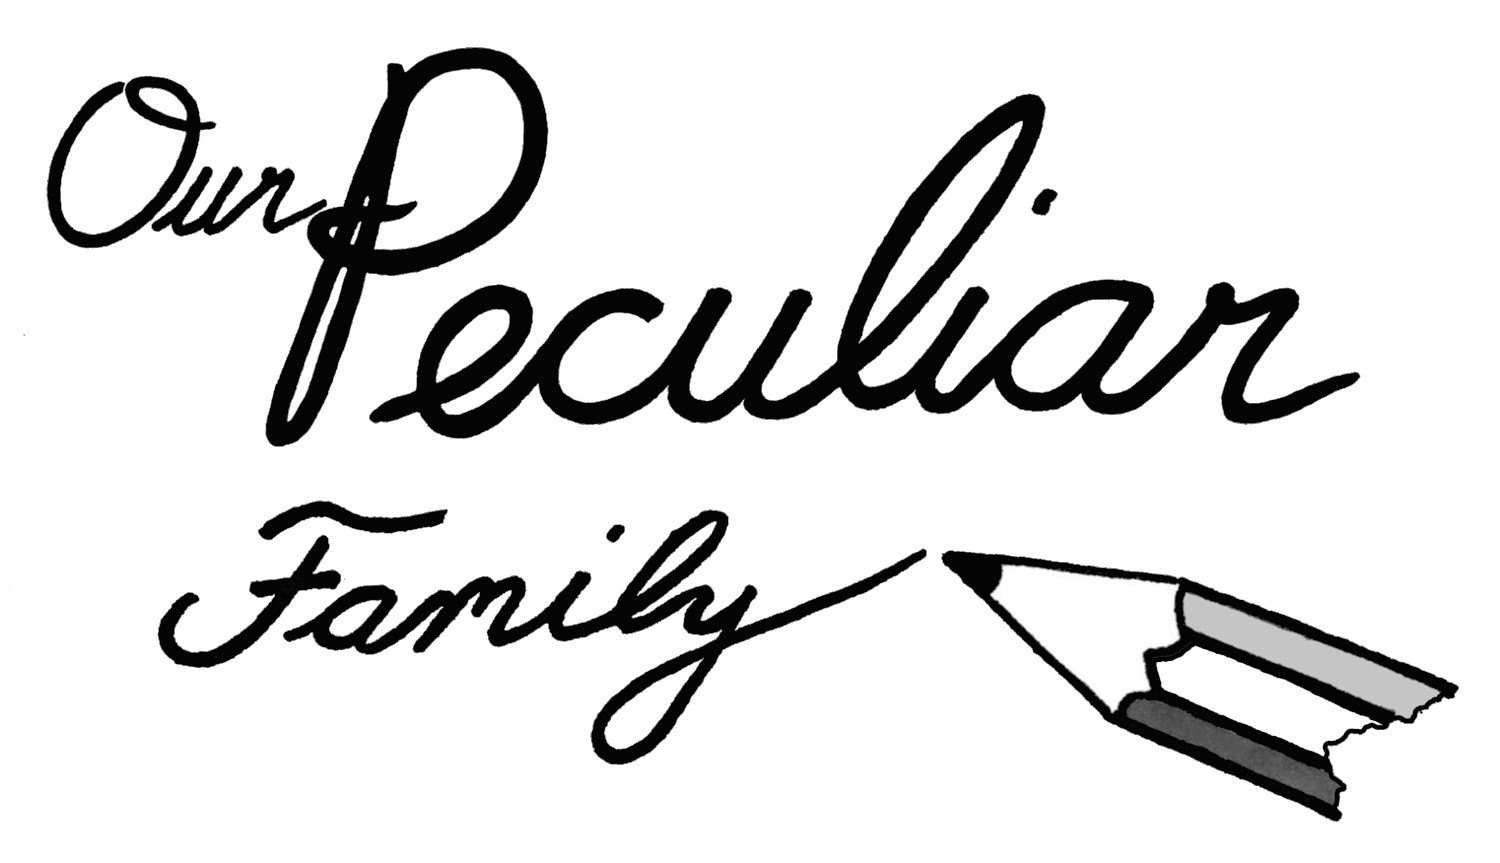 Our Peculiar Family